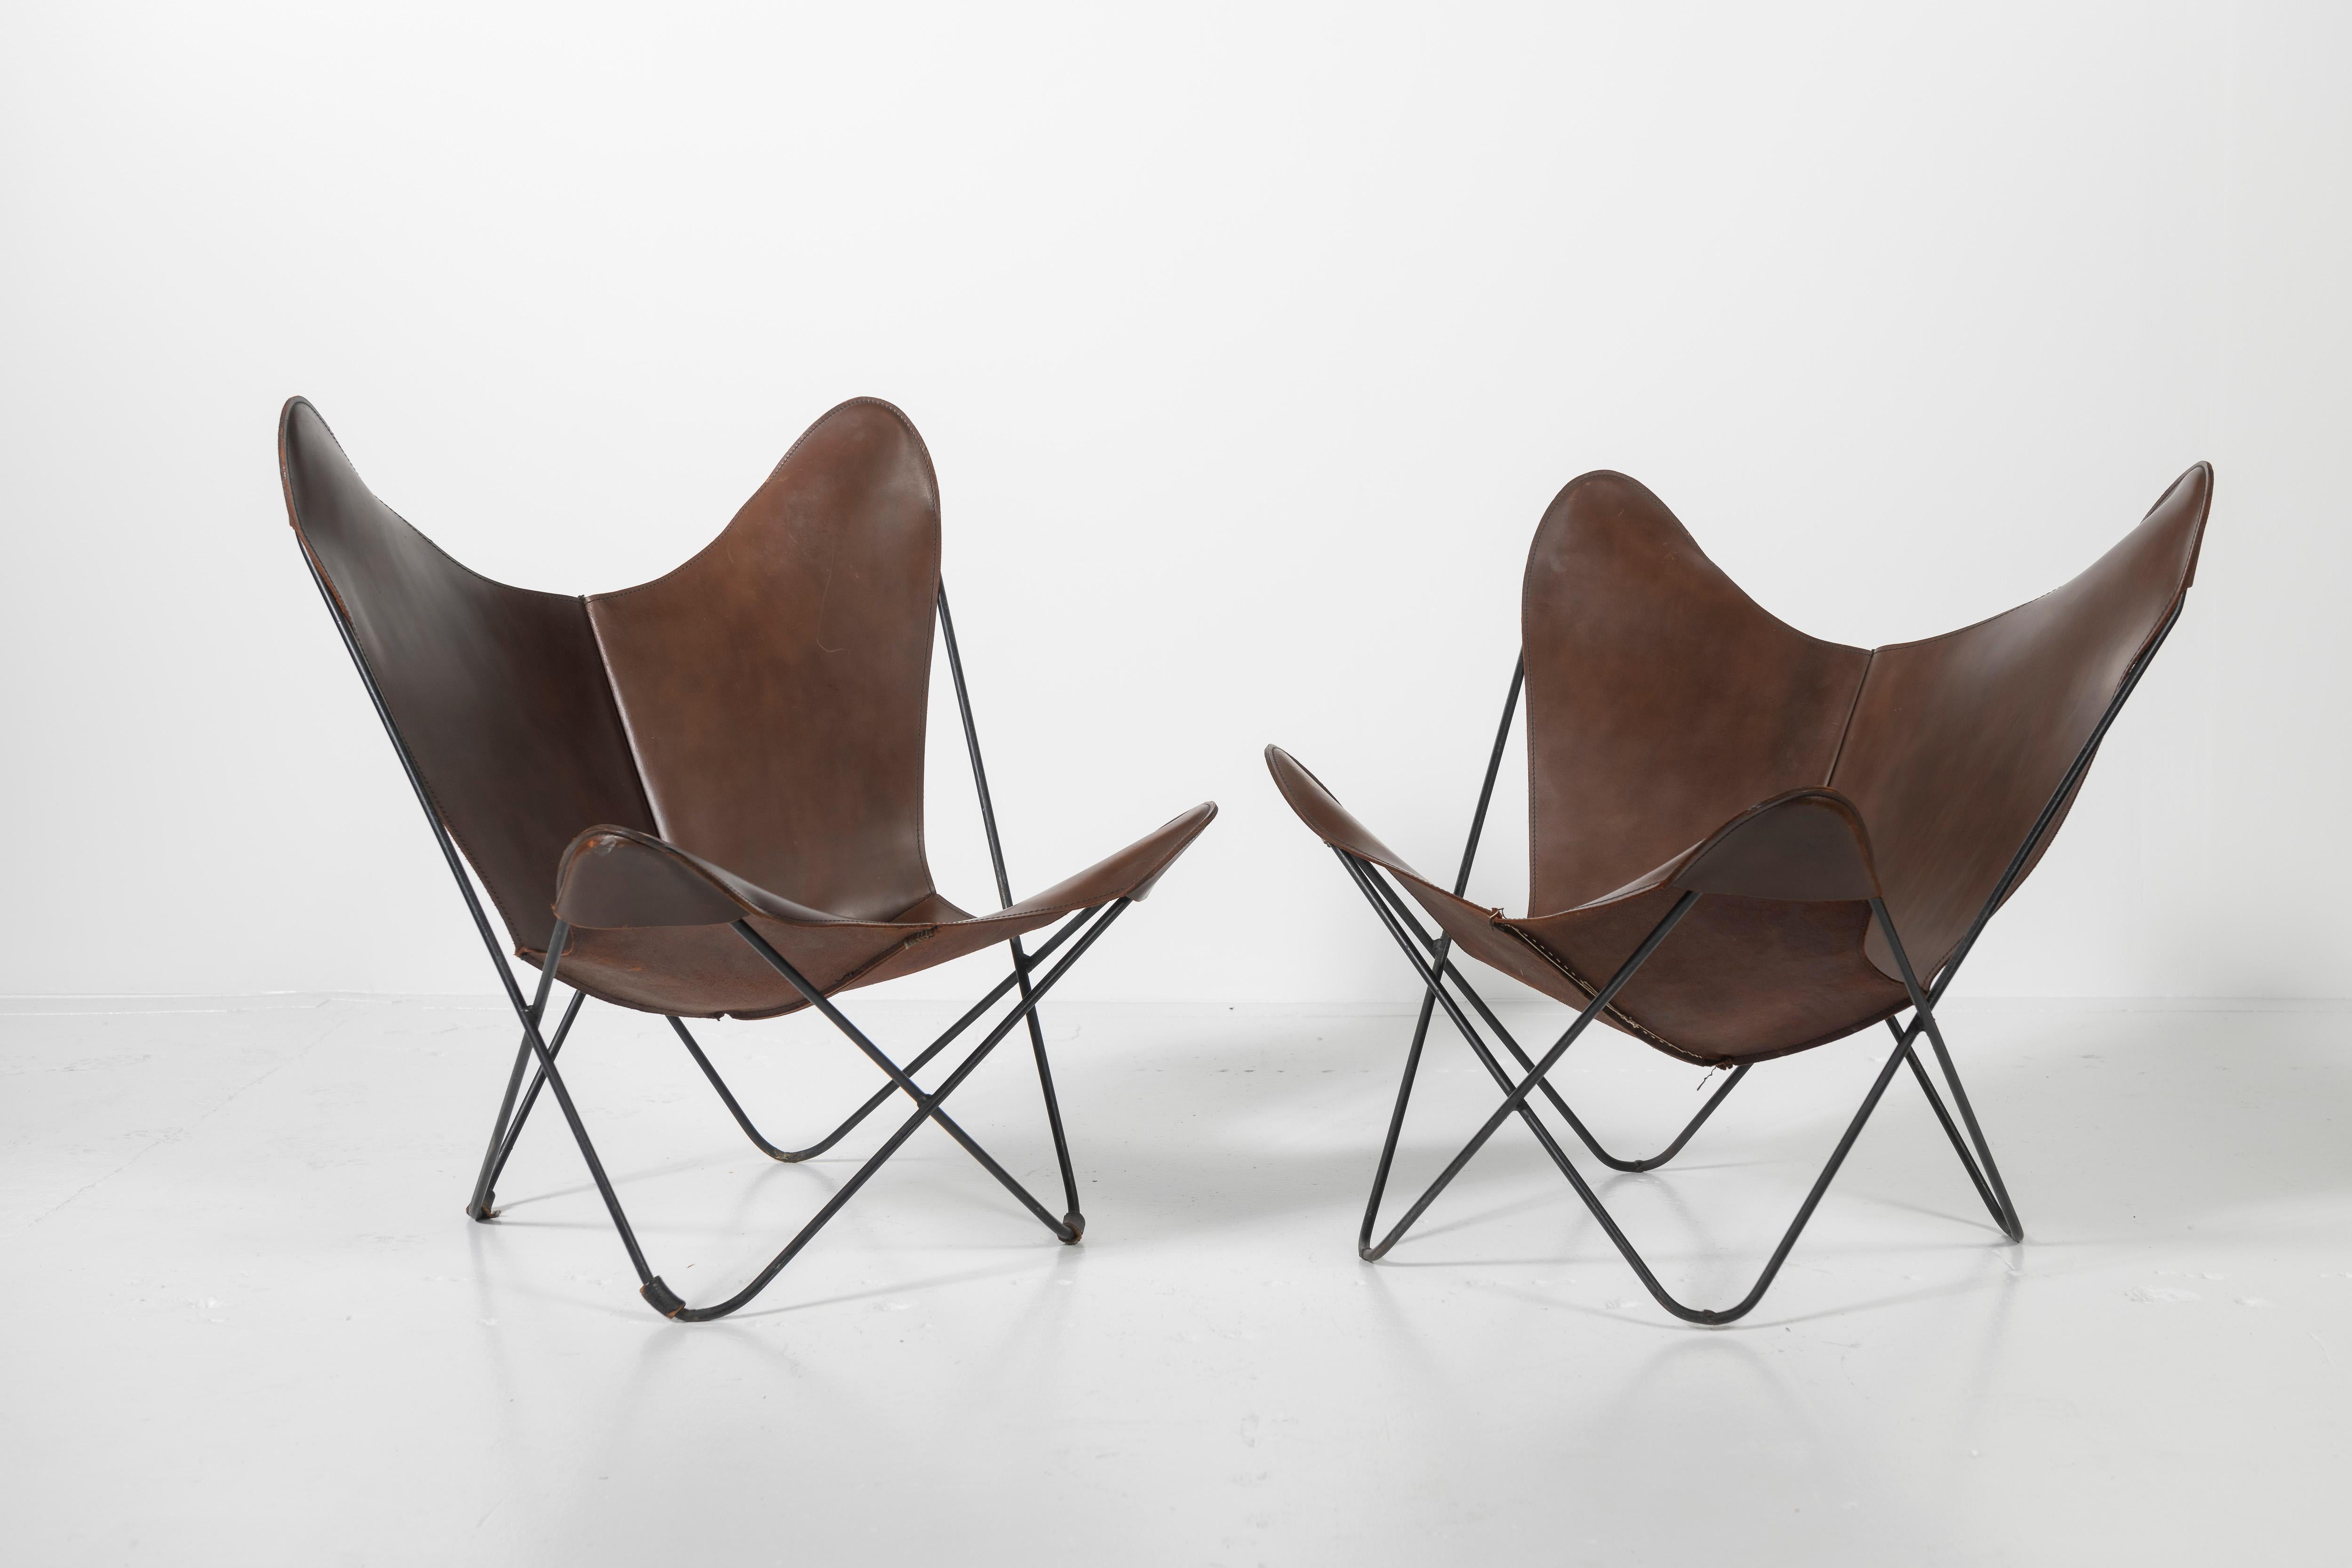 Iconic Knoll butterfly chairs, sold individually or as a pair, suitable for interior or exterior use. Gently worn leather slings add to the character of these pieces, sure to be enjoyed in every setting.